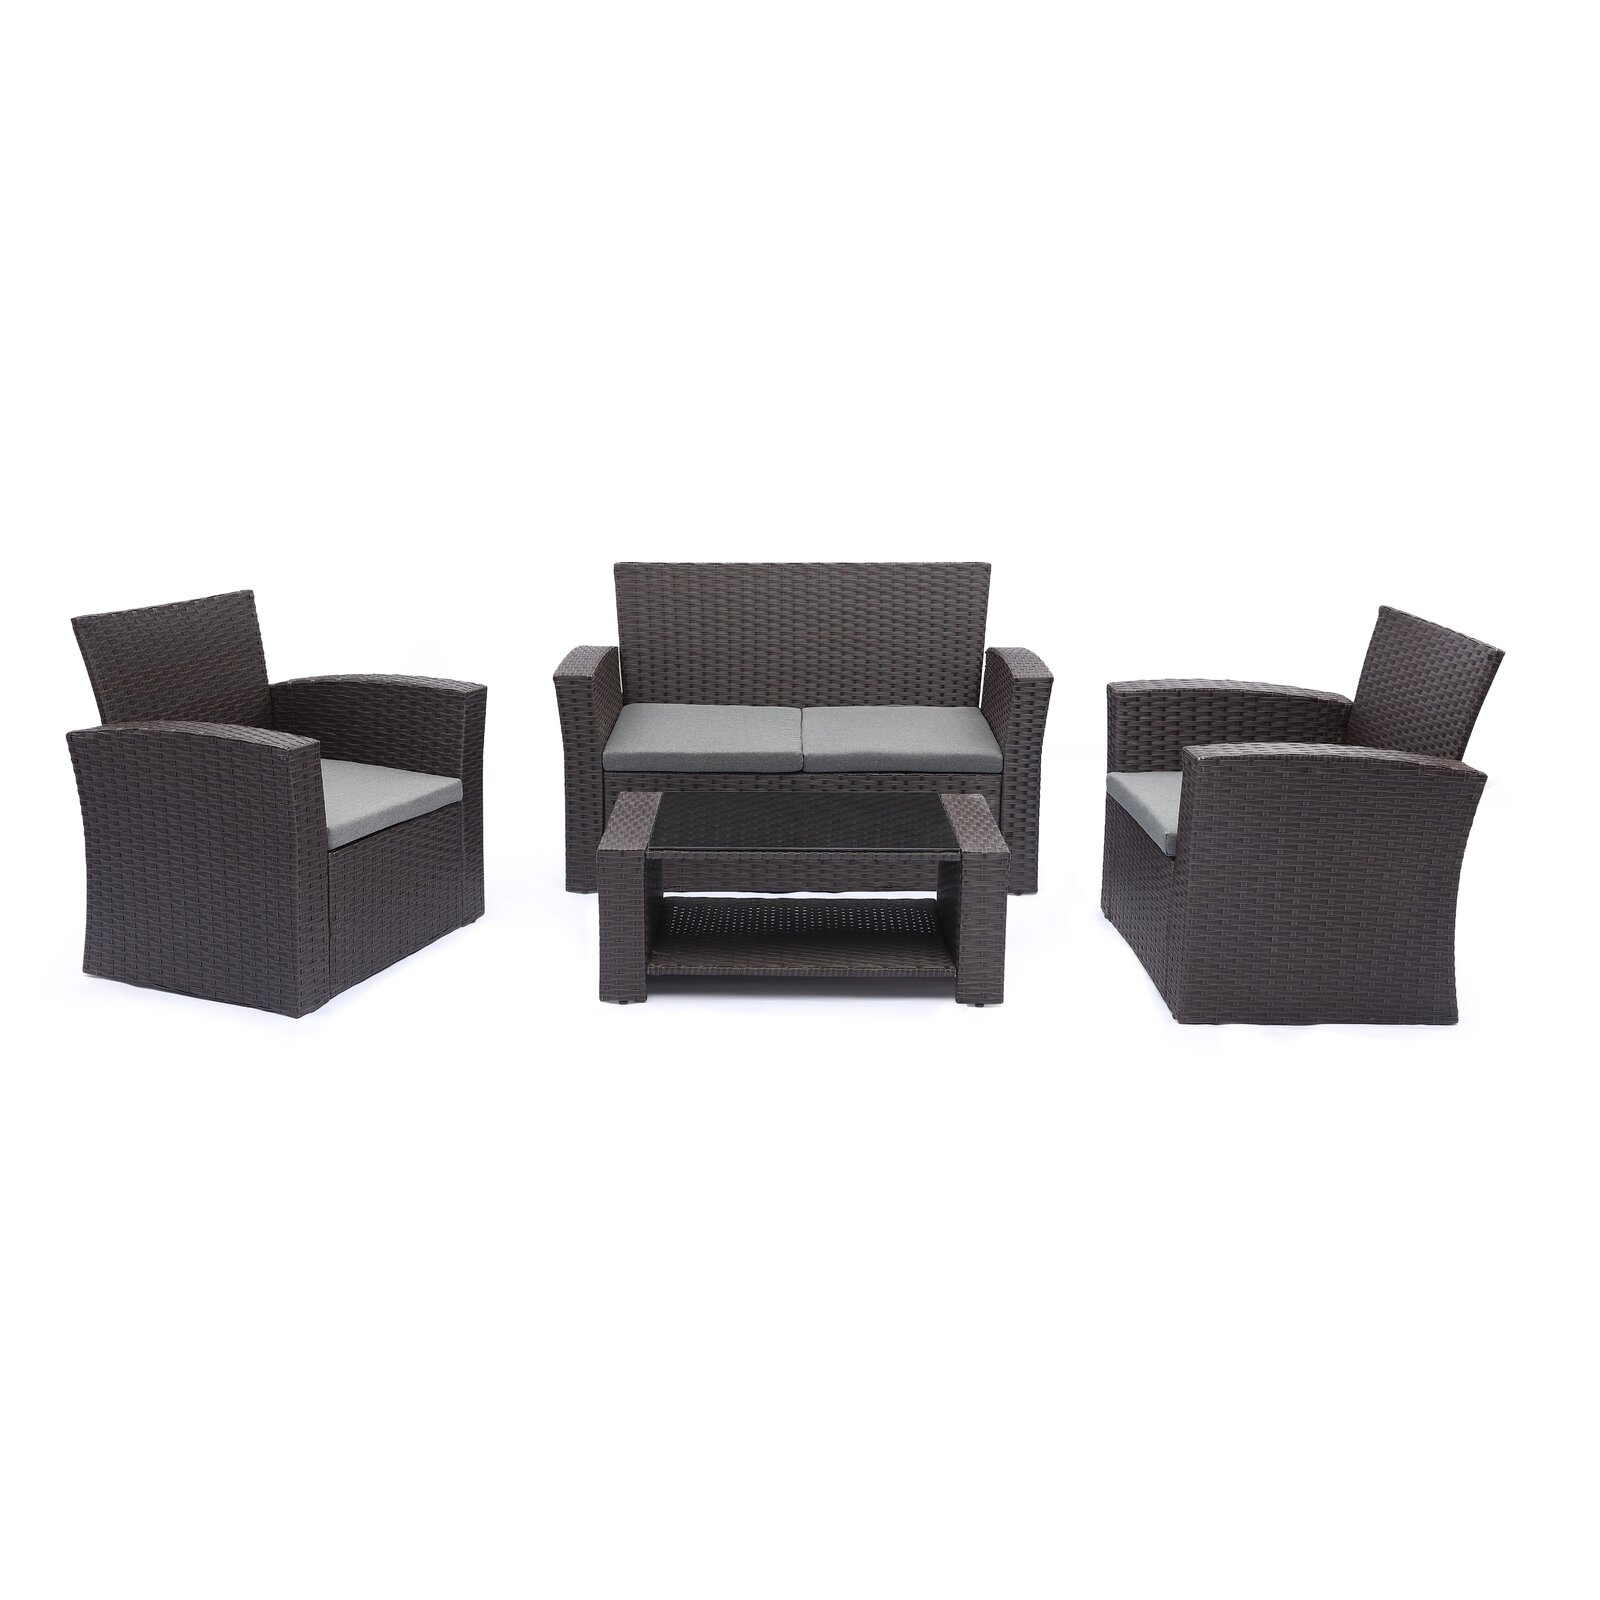 Ketillogh Wicker/Rattan 4 - Person Seating Group with Cushions, With Cushions, 2 Chair: Yes - image 4 of 5